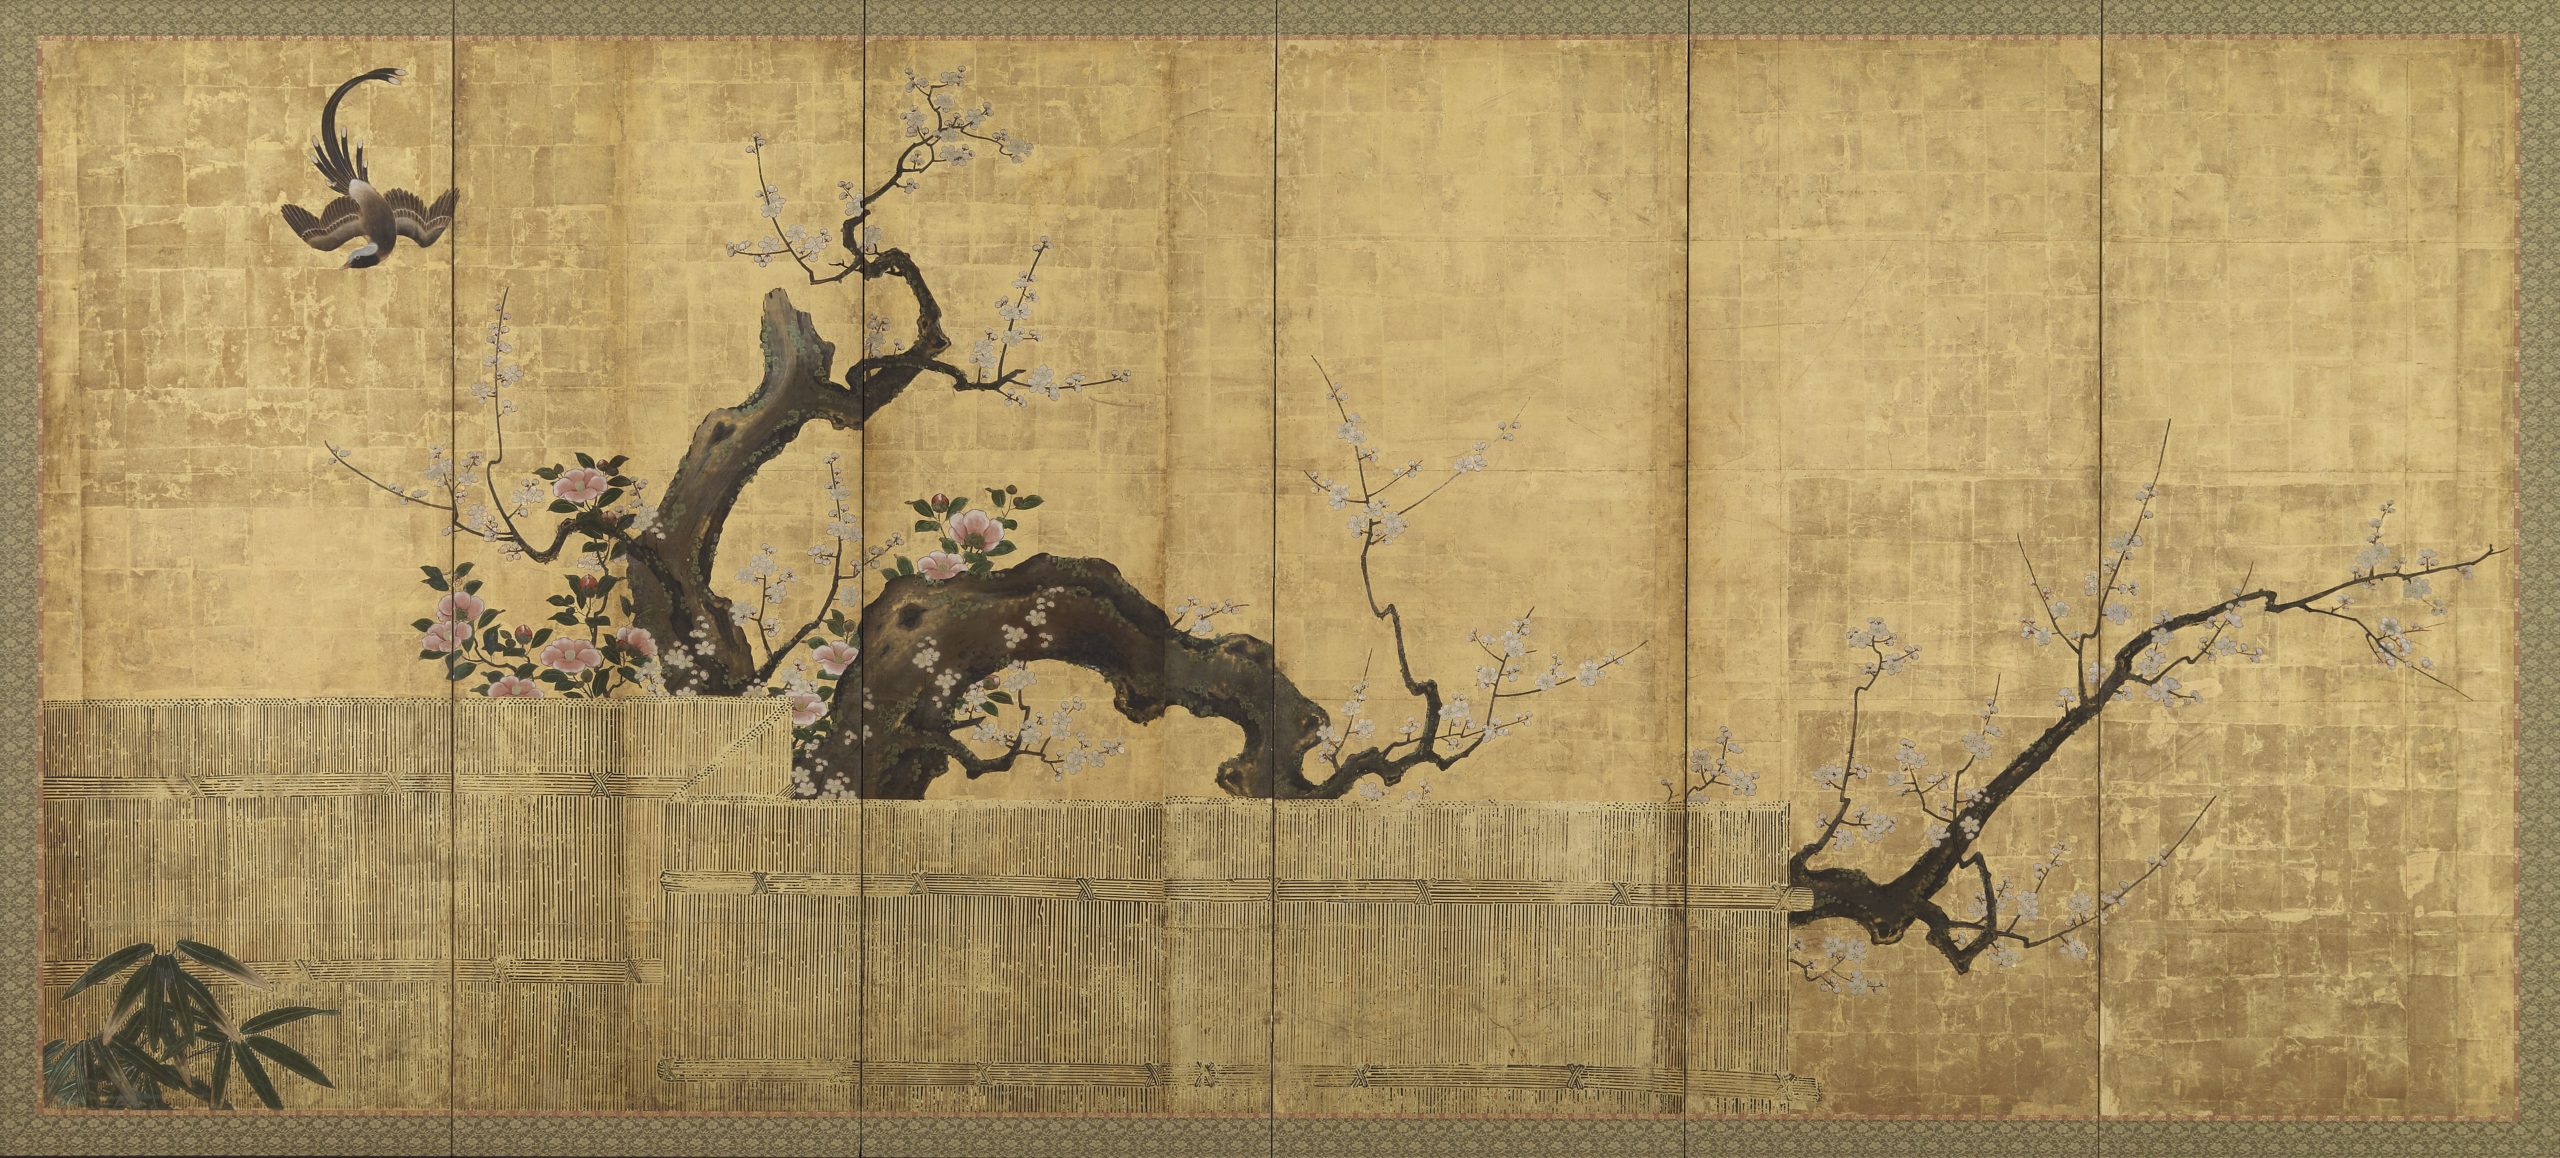 Kano Koi, Blossoming Plum and Camellia in a Garden Landscape, Edo Period, ink, color and gold on paper, 167.9 x 382 cm (National Museum of Asian Art, Washington)